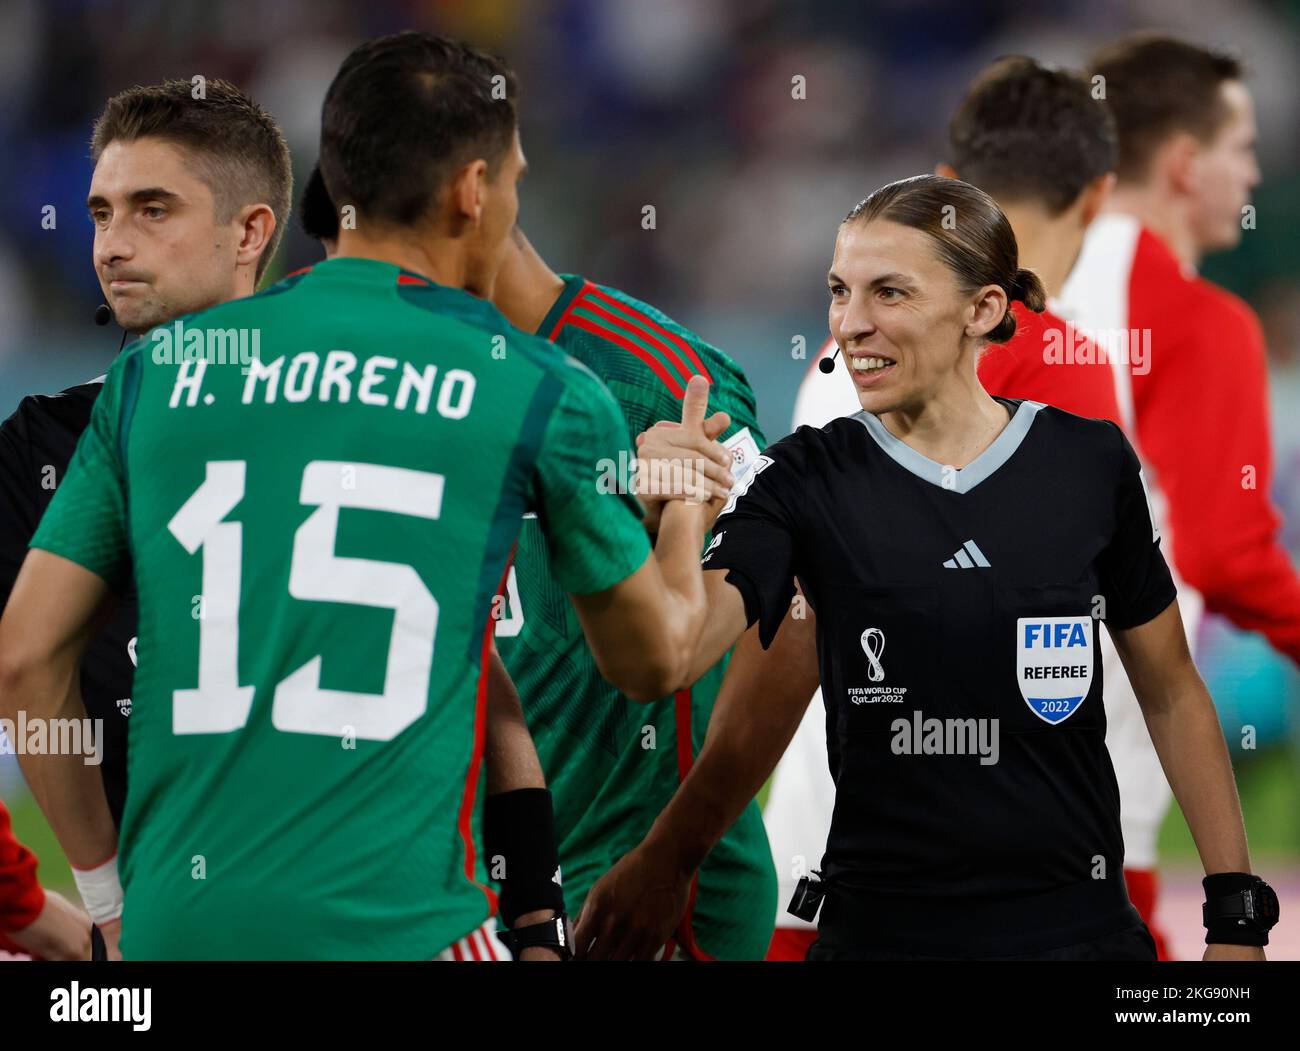 Doha, Qatar. 22nd Nov, 2022. The 4th official Stephanie Frappart (R) reacts with Hector Moreno of Mexico prior to the Group C match between Mexico and Poland of the 2022 FIFA World Cup at Ras Abu Aboud (974) Stadium in Doha, Qatar, Nov. 22, 2022. Credit: Wang Lili/Xinhua/Alamy Live News Stock Photo